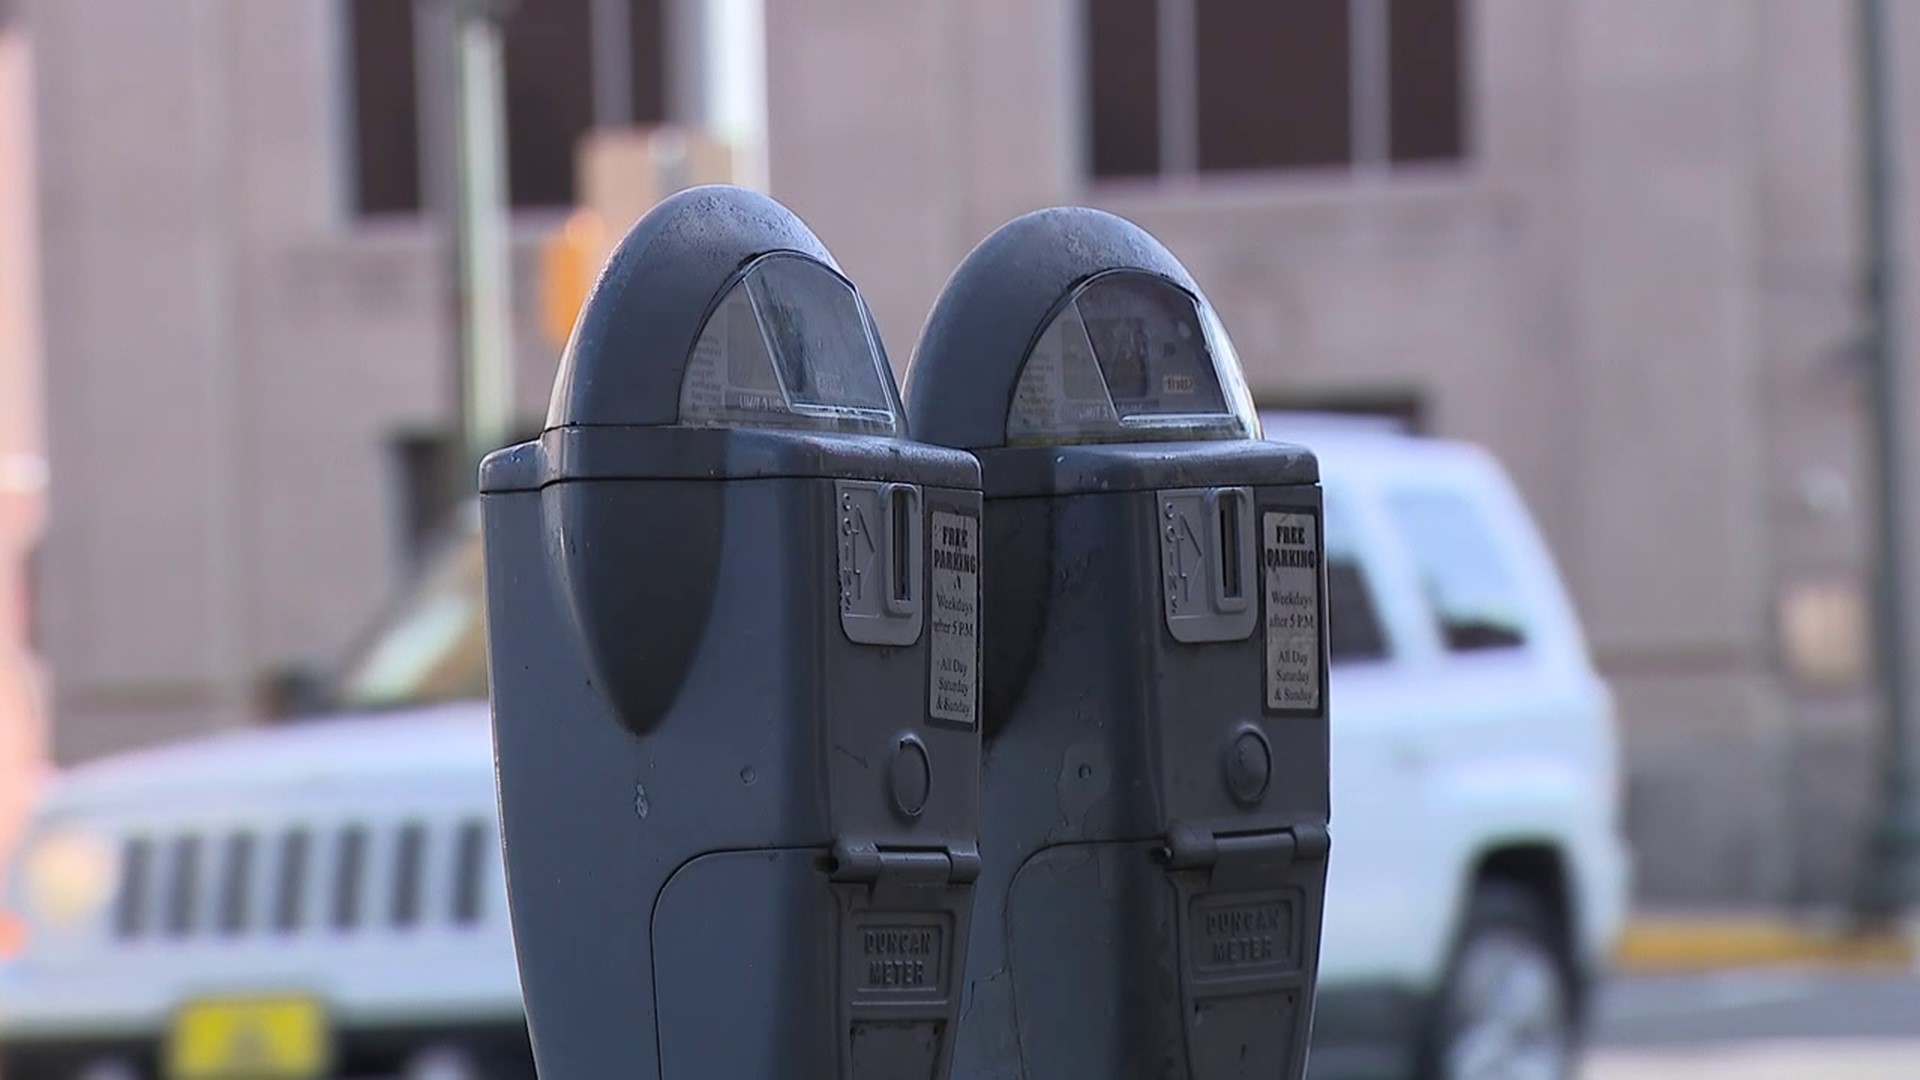 Text-to-pay parking meters are being installed in the city's downtown.